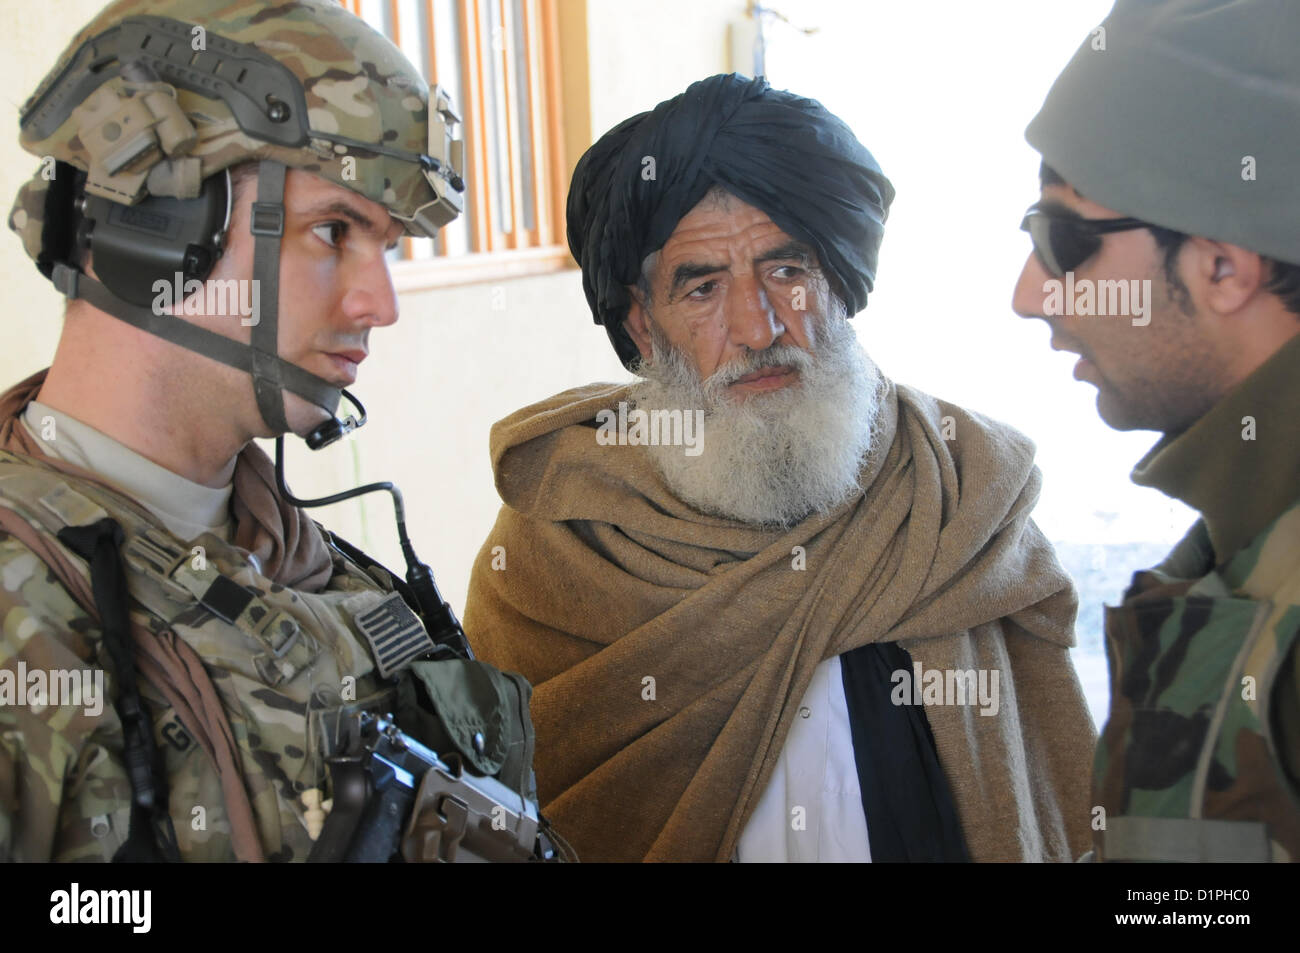 U.S. Army Capt. Jeremiah Gebhart, a civil affairs officer for Provincial Reconstruction Team (PRT) Farah, left, talks with a local Afghan elder through an interpreter at the Bala Boluk district center, Jan. 2.  PRT Farah's mission is to train, advise, and assist Afghan government leaders at the municipal, district, and provincial levels in Farah province Afghanistan.  Their civil military team is comprised of members of the U.S. Navy, U.S. Army, the U.S. Department of State and the U.S. Agency for International Development (USAID).  (U.S. Navy photo by Lt. j.g. Matthew Stroup/released) Stock Photo